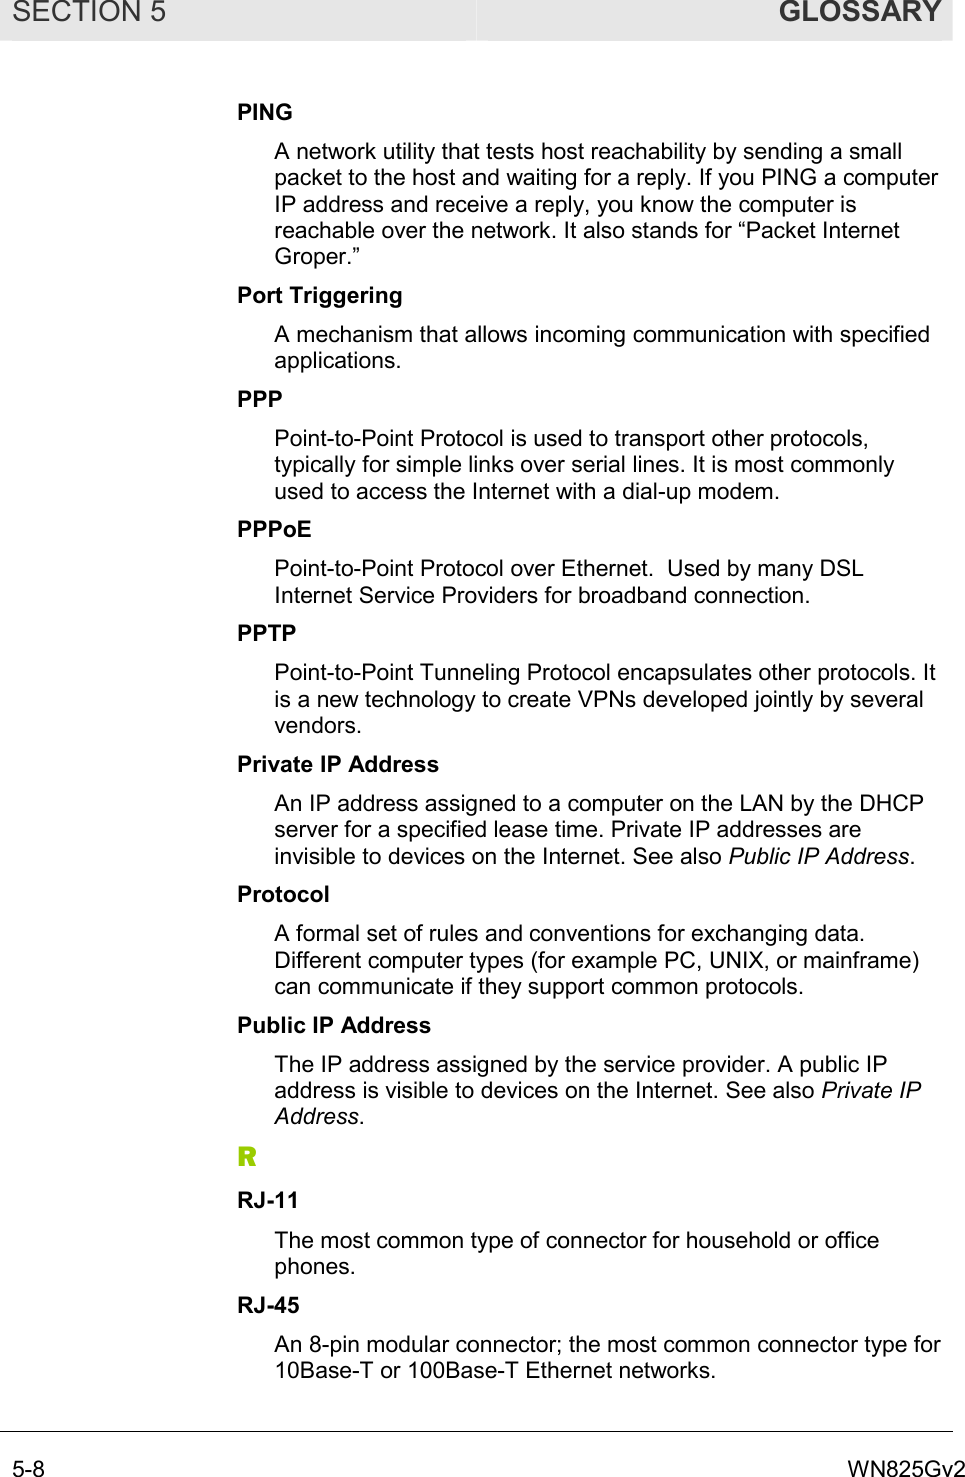 SECTION 5  GLOSSARY 5-8  WN825Gv2 PING A network utility that tests host reachability by sending a small packet to the host and waiting for a reply. If you PING a computer IP address and receive a reply, you know the computer is reachable over the network. It also stands for “Packet Internet Groper.” Port Triggering A mechanism that allows incoming communication with specified applications.  PPP Point-to-Point Protocol is used to transport other protocols, typically for simple links over serial lines. It is most commonly used to access the Internet with a dial-up modem. PPPoE Point-to-Point Protocol over Ethernet.  Used by many DSL Internet Service Providers for broadband connection. PPTP Point-to-Point Tunneling Protocol encapsulates other protocols. It is a new technology to create VPNs developed jointly by several vendors. Private IP Address An IP address assigned to a computer on the LAN by the DHCP server for a specified lease time. Private IP addresses are invisible to devices on the Internet. See also Public IP Address. Protocol A formal set of rules and conventions for exchanging data. Different computer types (for example PC, UNIX, or mainframe) can communicate if they support common protocols. Public IP Address The IP address assigned by the service provider. A public IP address is visible to devices on the Internet. See also Private IP Address. R RJ-11 The most common type of connector for household or office phones. RJ-45 An 8-pin modular connector; the most common connector type for 10Base-T or 100Base-T Ethernet networks. 